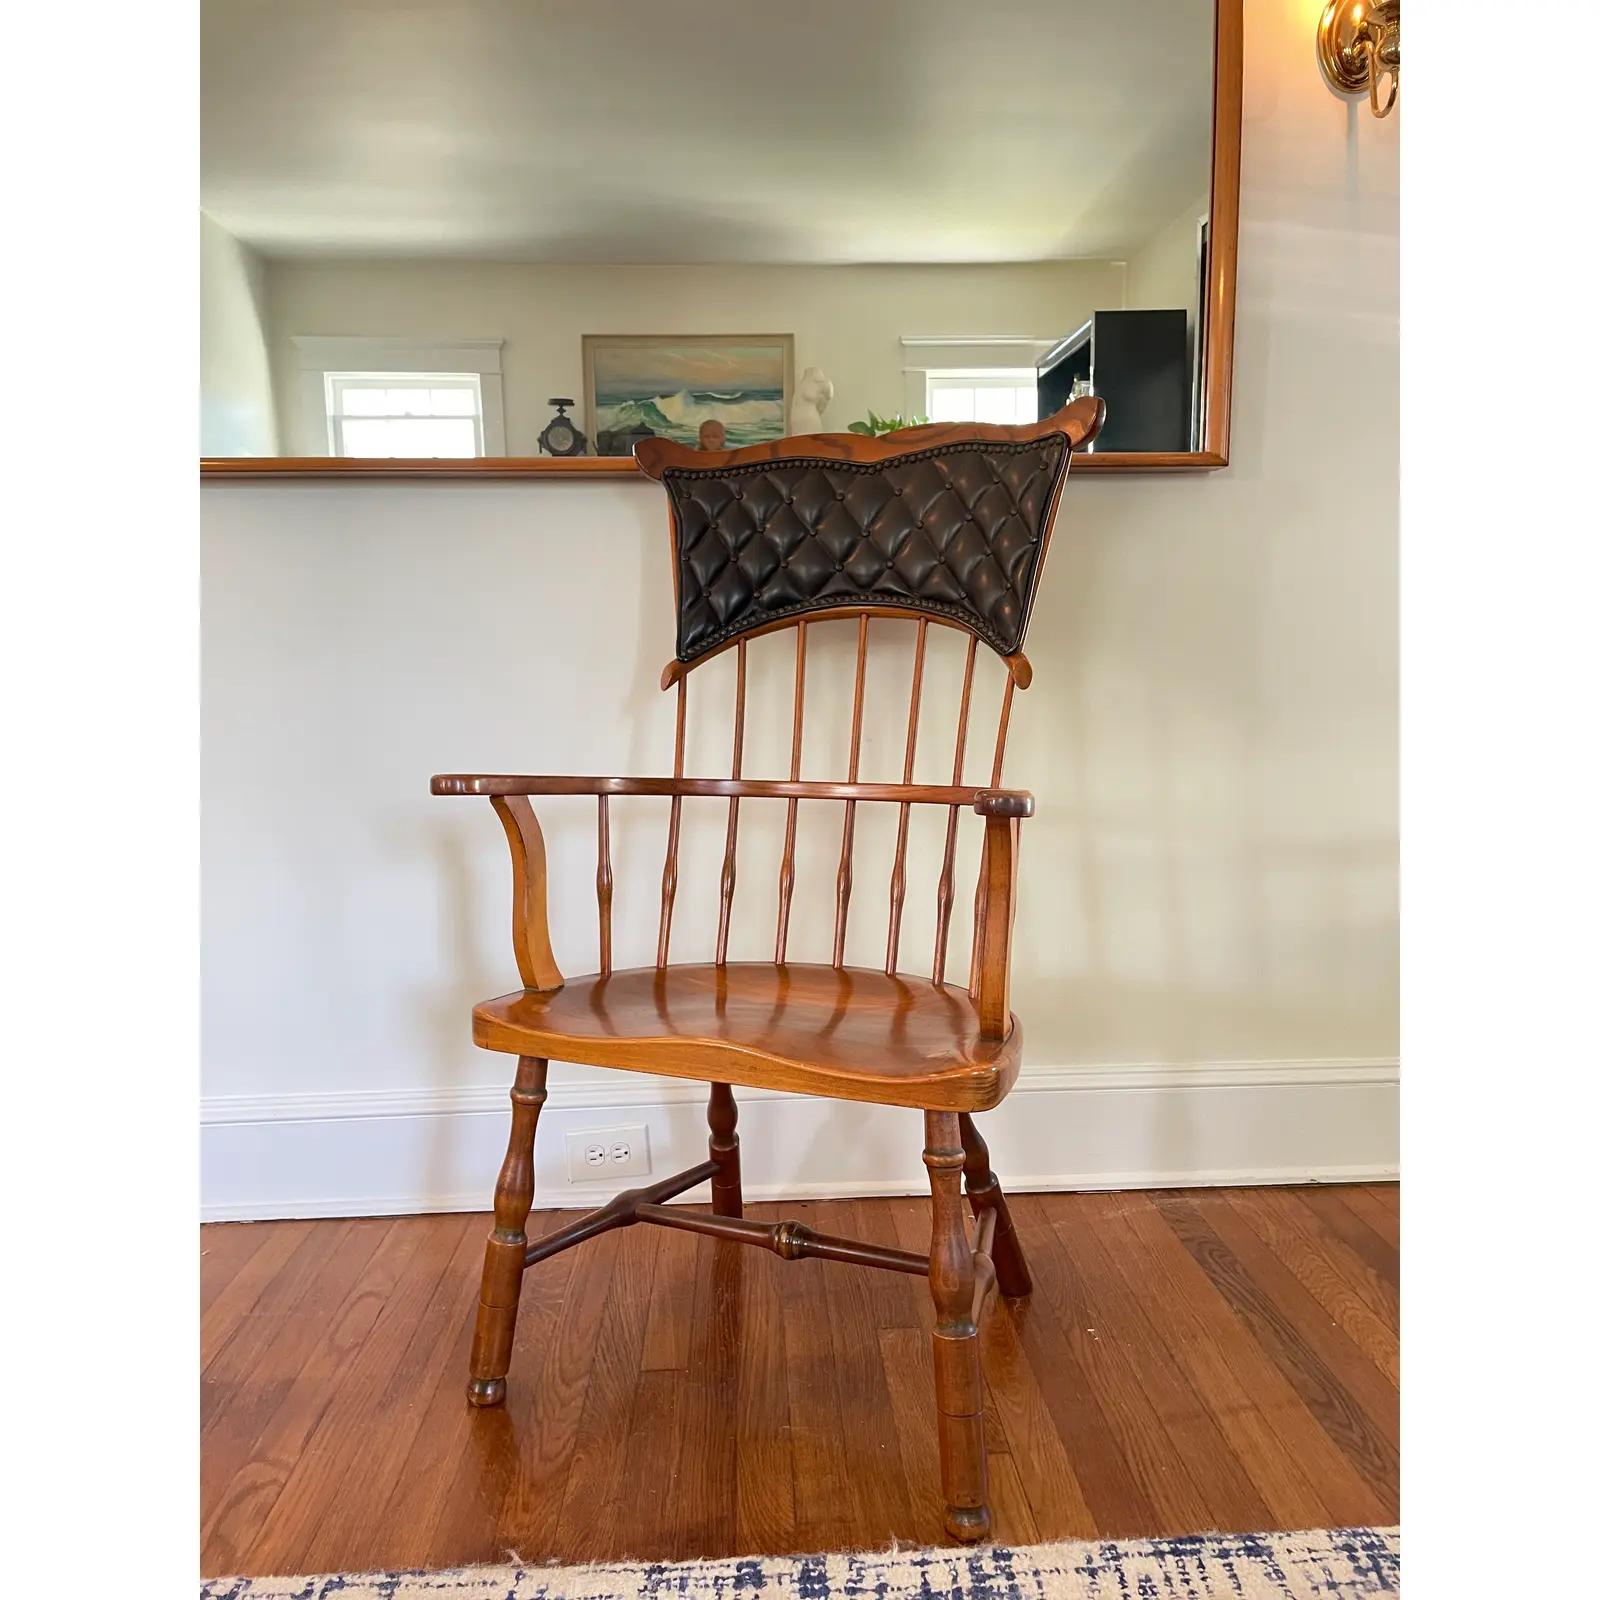 North American Vintage Duckloe Windsor Chair Mystic Seaport For Sale